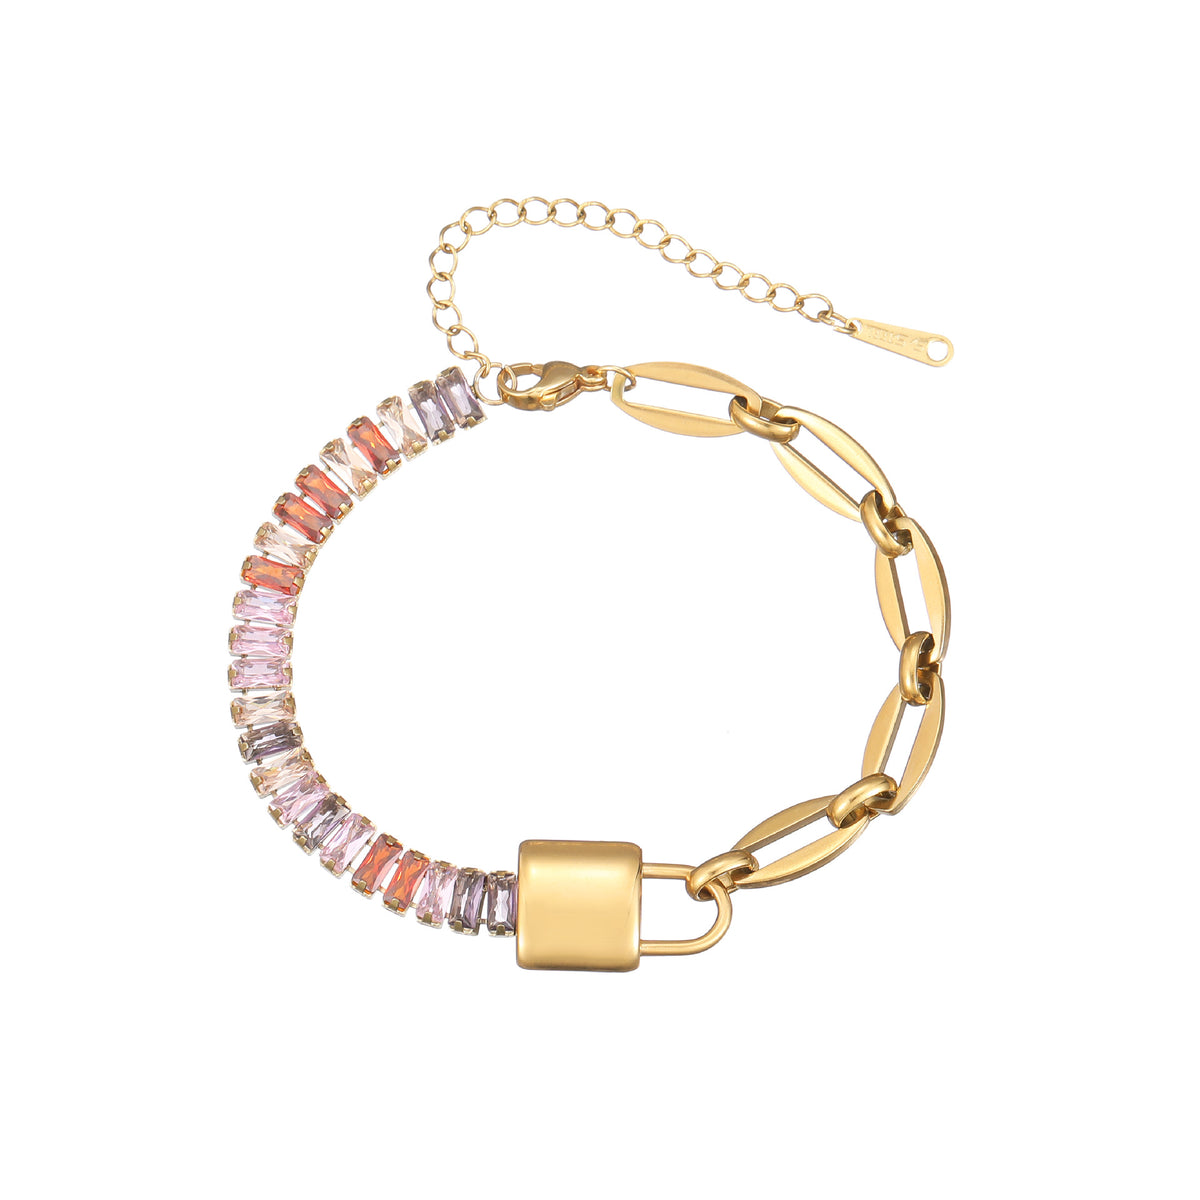 Colorful Zircon Lock and Butterfly Casual Elegant Lovers' Bracelet  UponBasics Lock Golden 